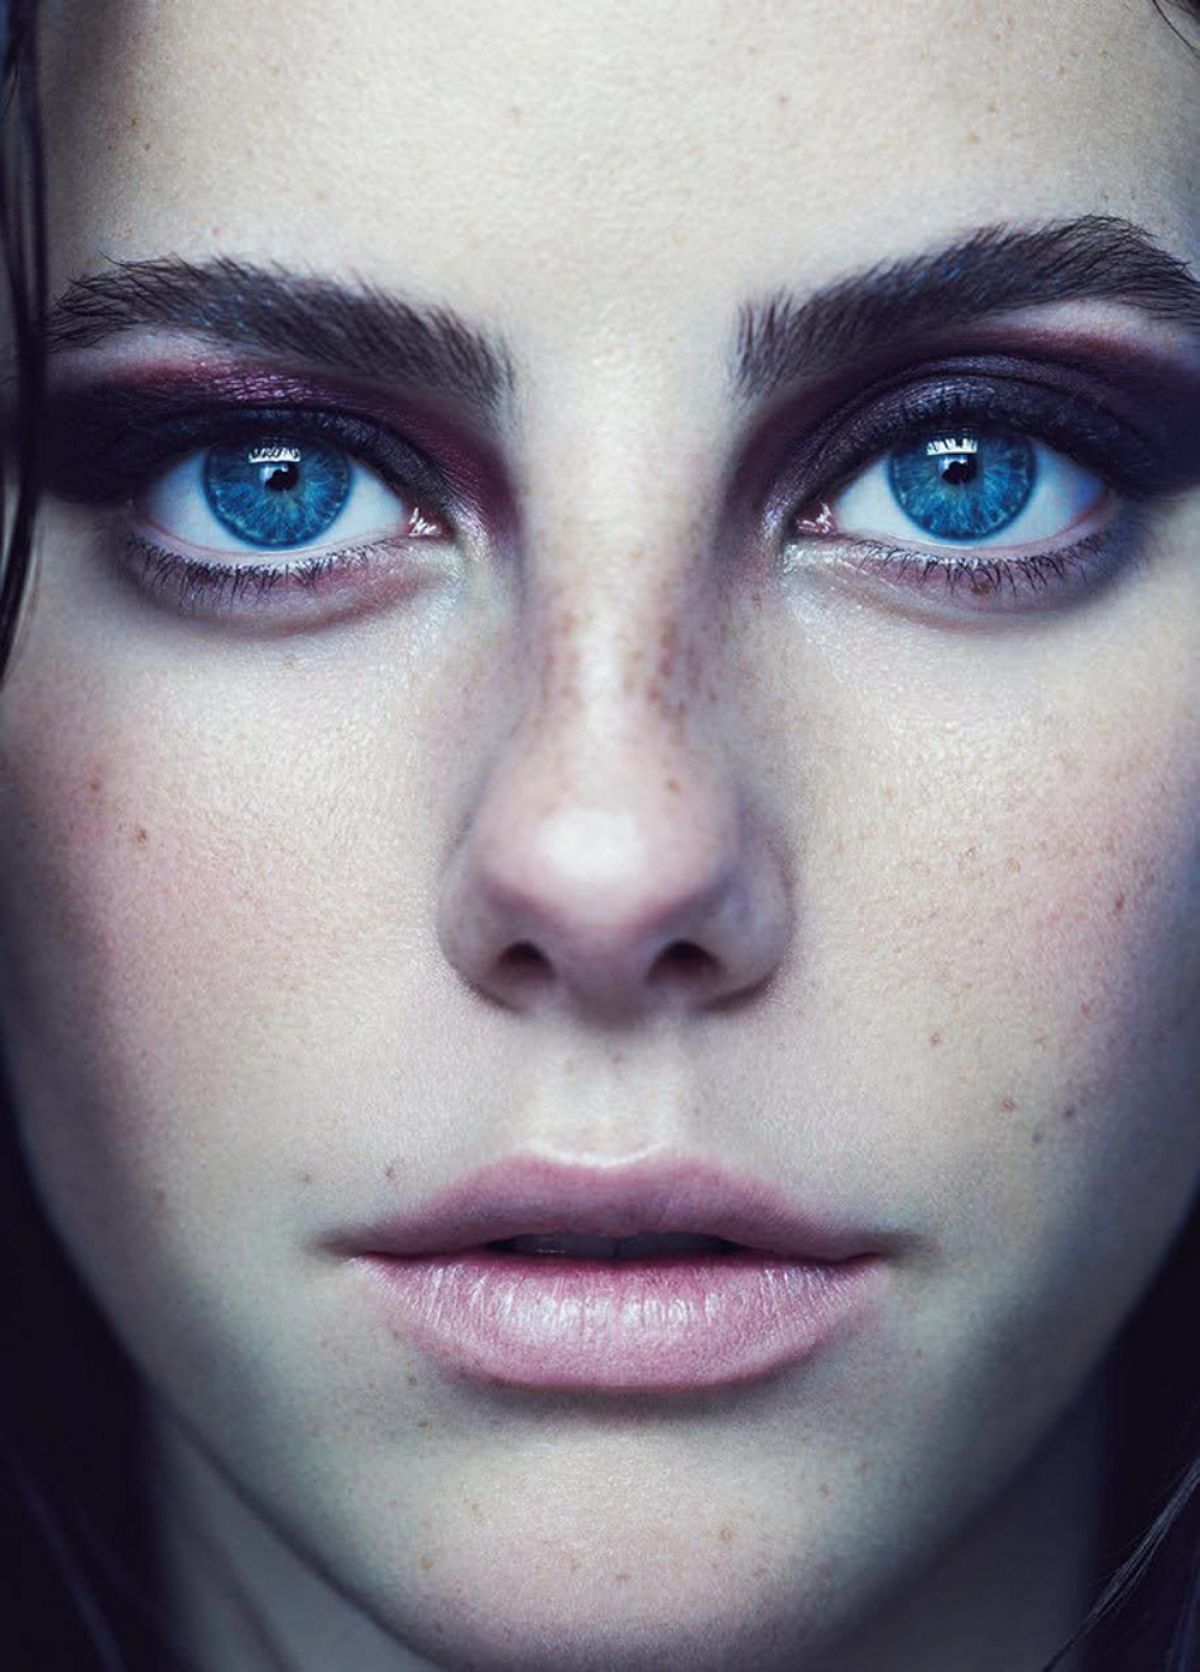 tumblr face drawings Magazine, KAYA Marie 2014 Issue in SCODELARIO April Claire